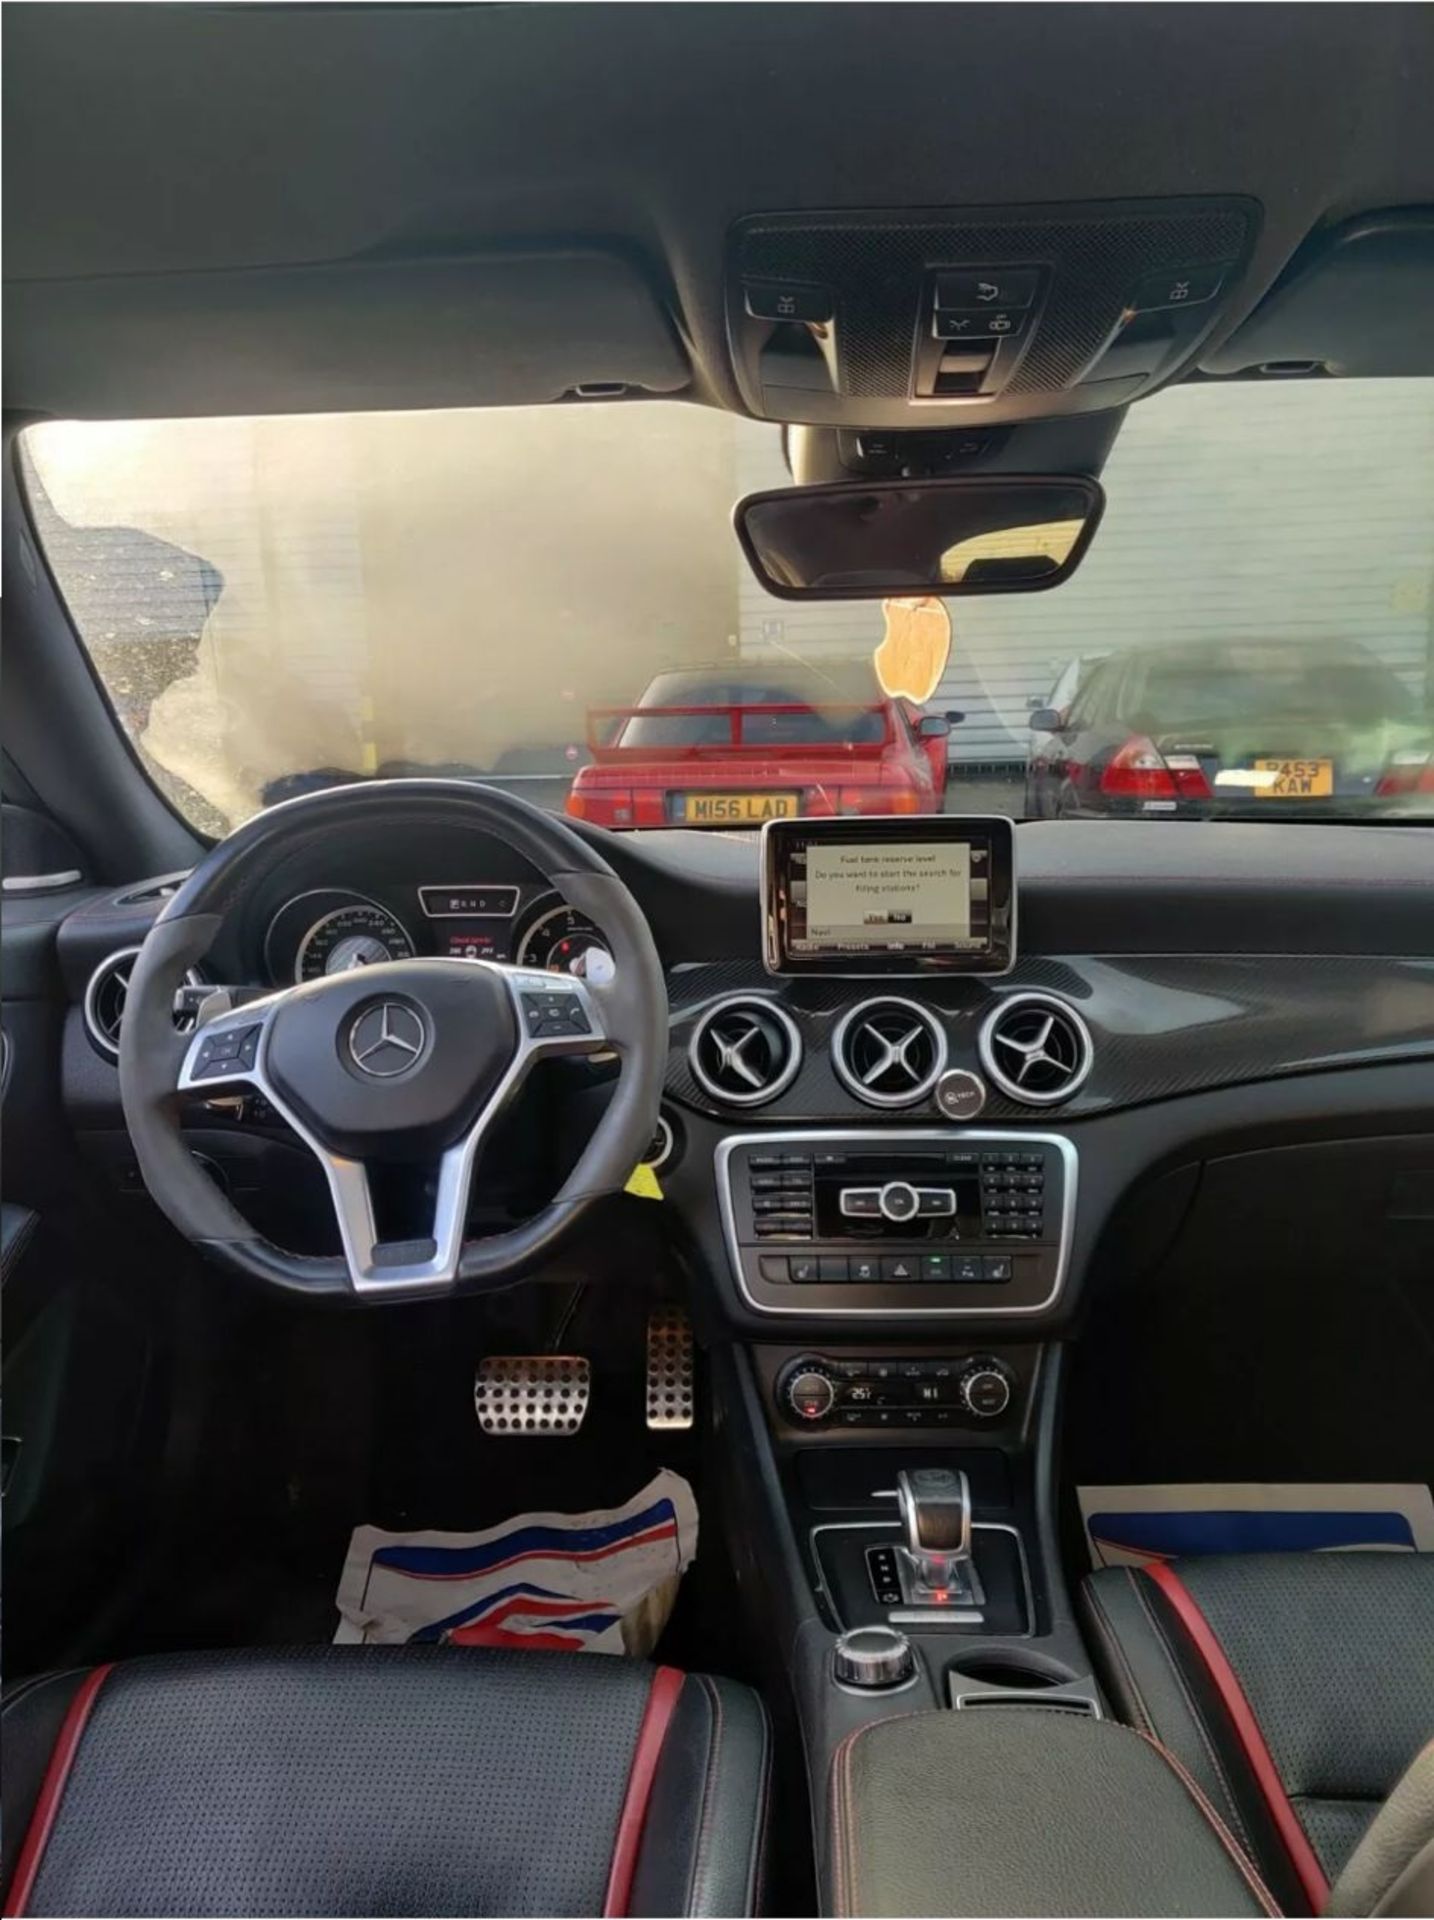 MERCEDES CLA45 AMG TOP SPEC EDITION ONE LIMITED EDITION 1 OF 500, BUCKET SEATS LHD, 40K MILES - Image 4 of 9